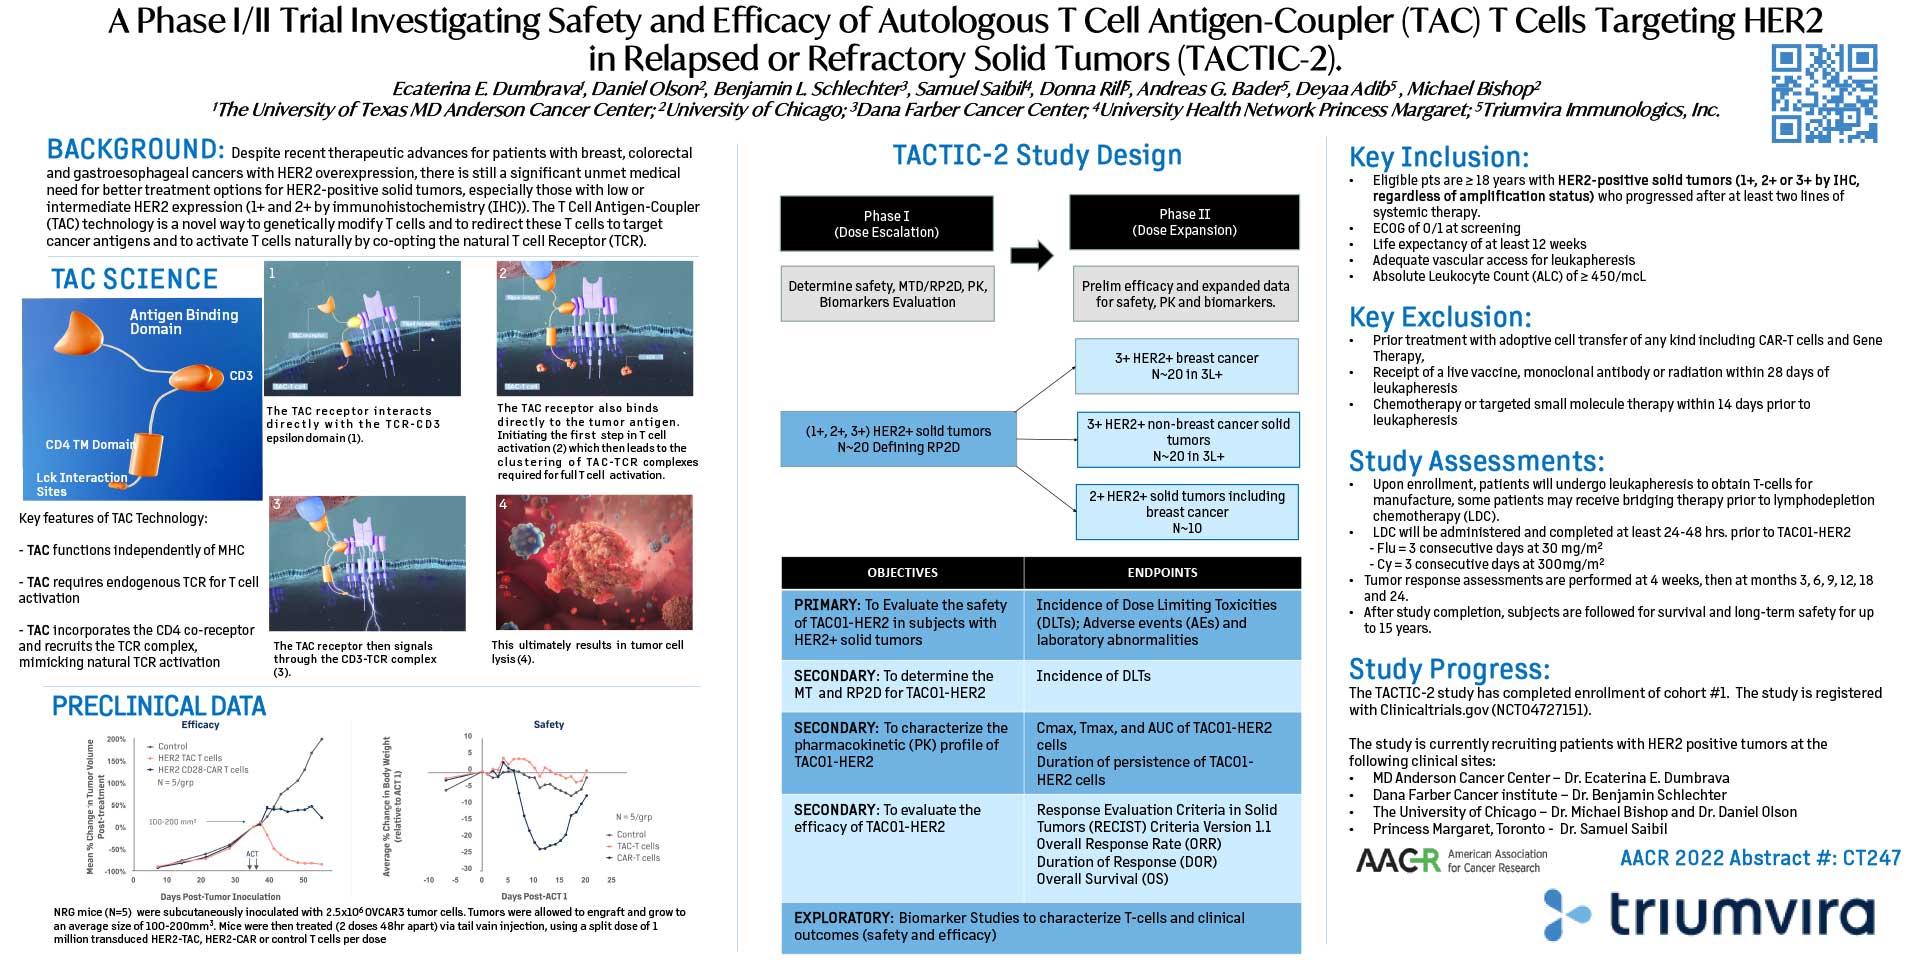 A Phase I/II Trial Investigating Safety and Efficacy of Autologous T Cell Antigen-Coupler (TAC) T Cells Targeting HER2 in Relapsed or Refractory Solid Tumors (TACTIC-2)